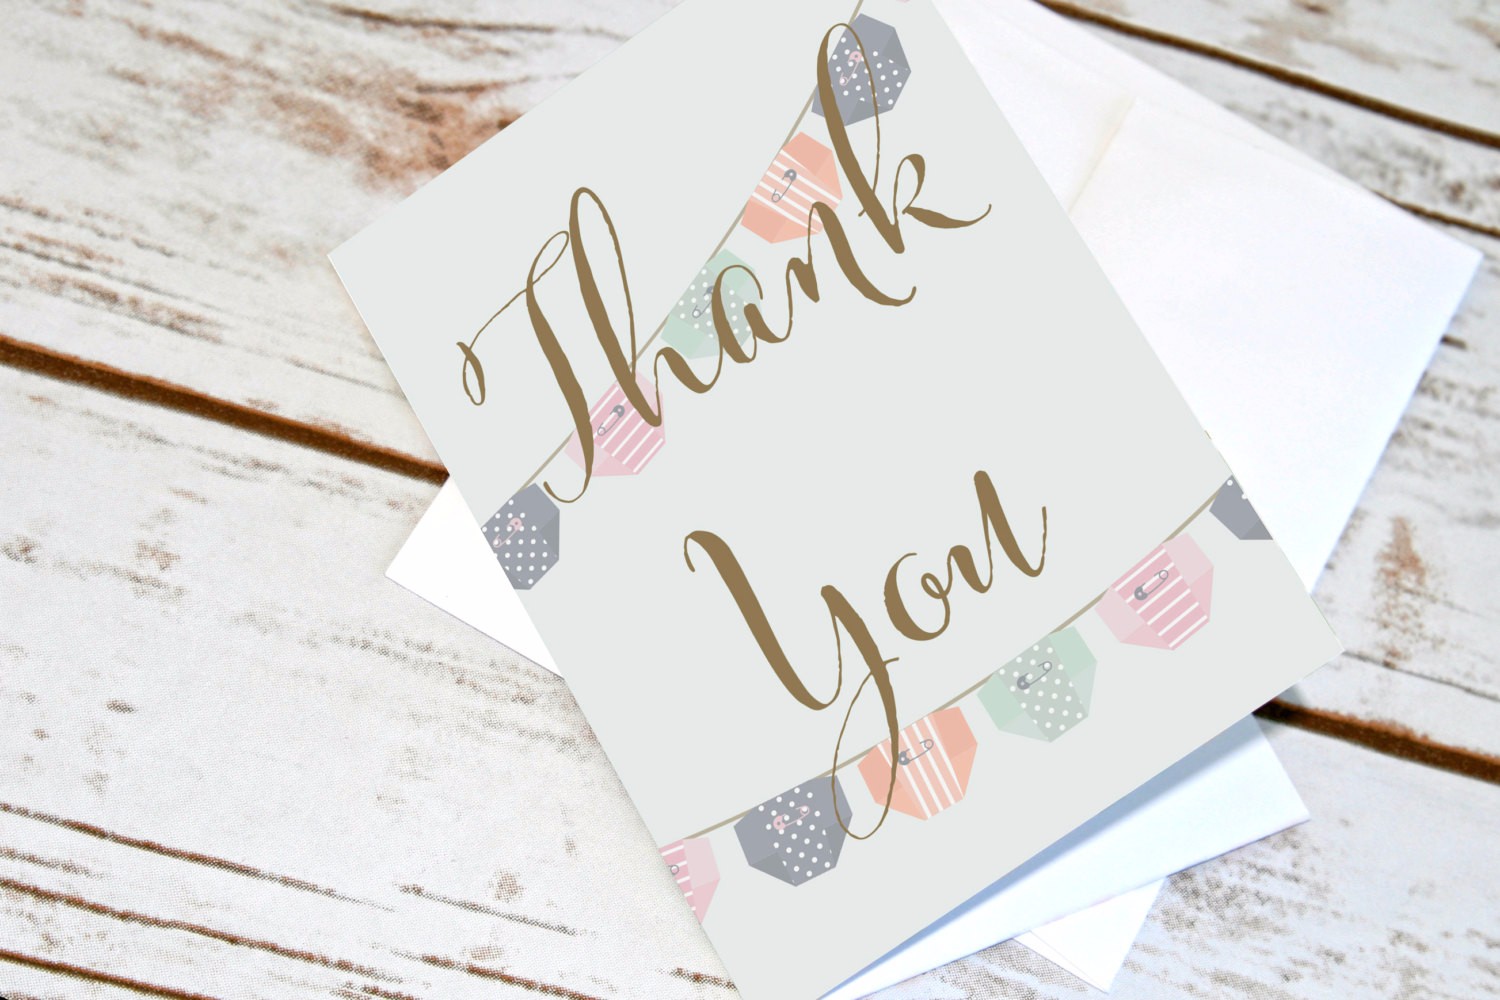 Full Size of Baby Shower:72+ Rousing Baby Shower Thank You Cards Picture Ideas Baby Shower Thank You Cards Baby Shower Thank You Cards